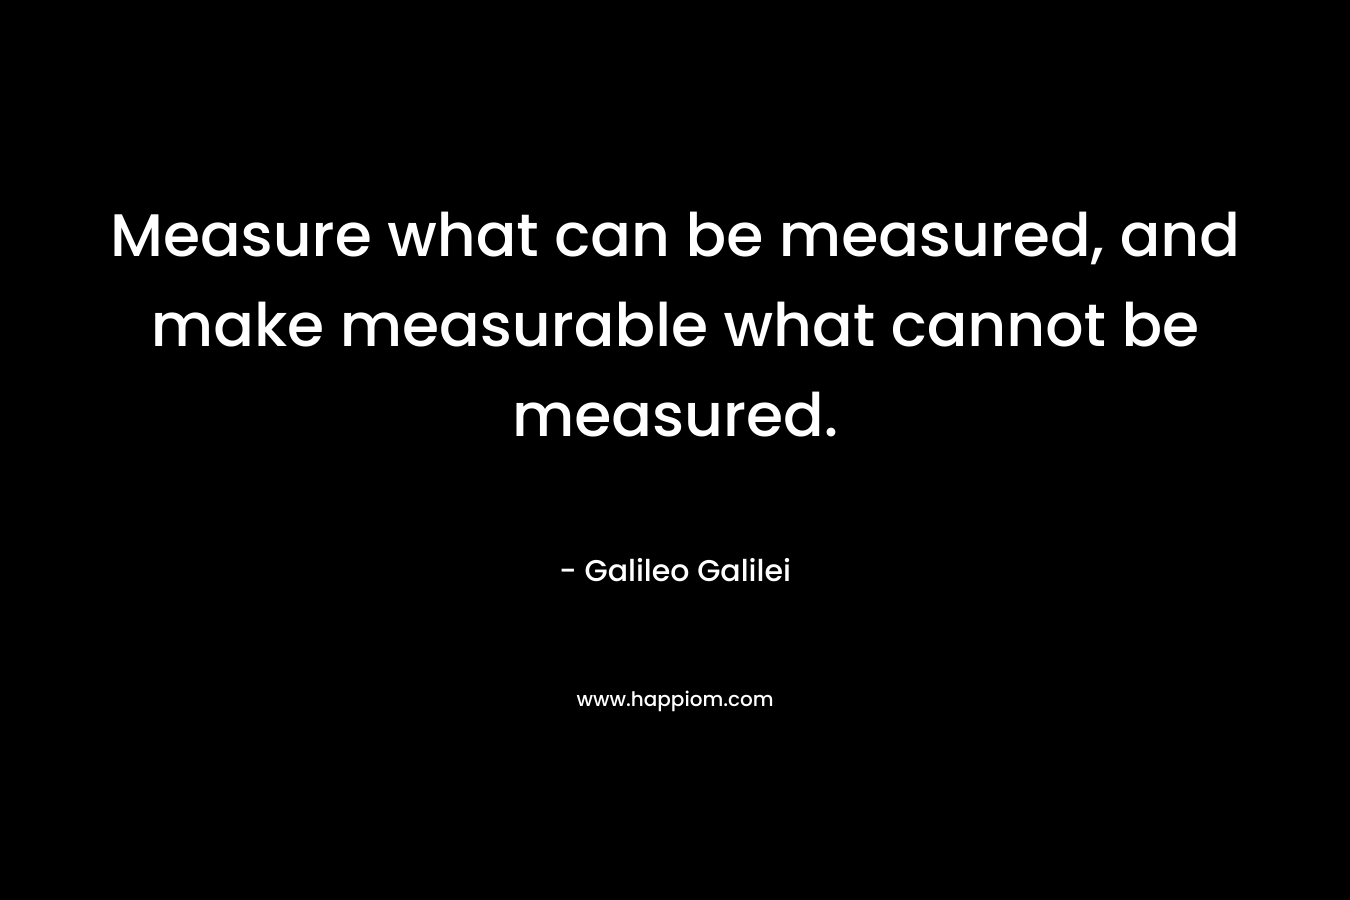 Measure what can be measured, and make measurable what cannot be measured. – Galileo Galilei